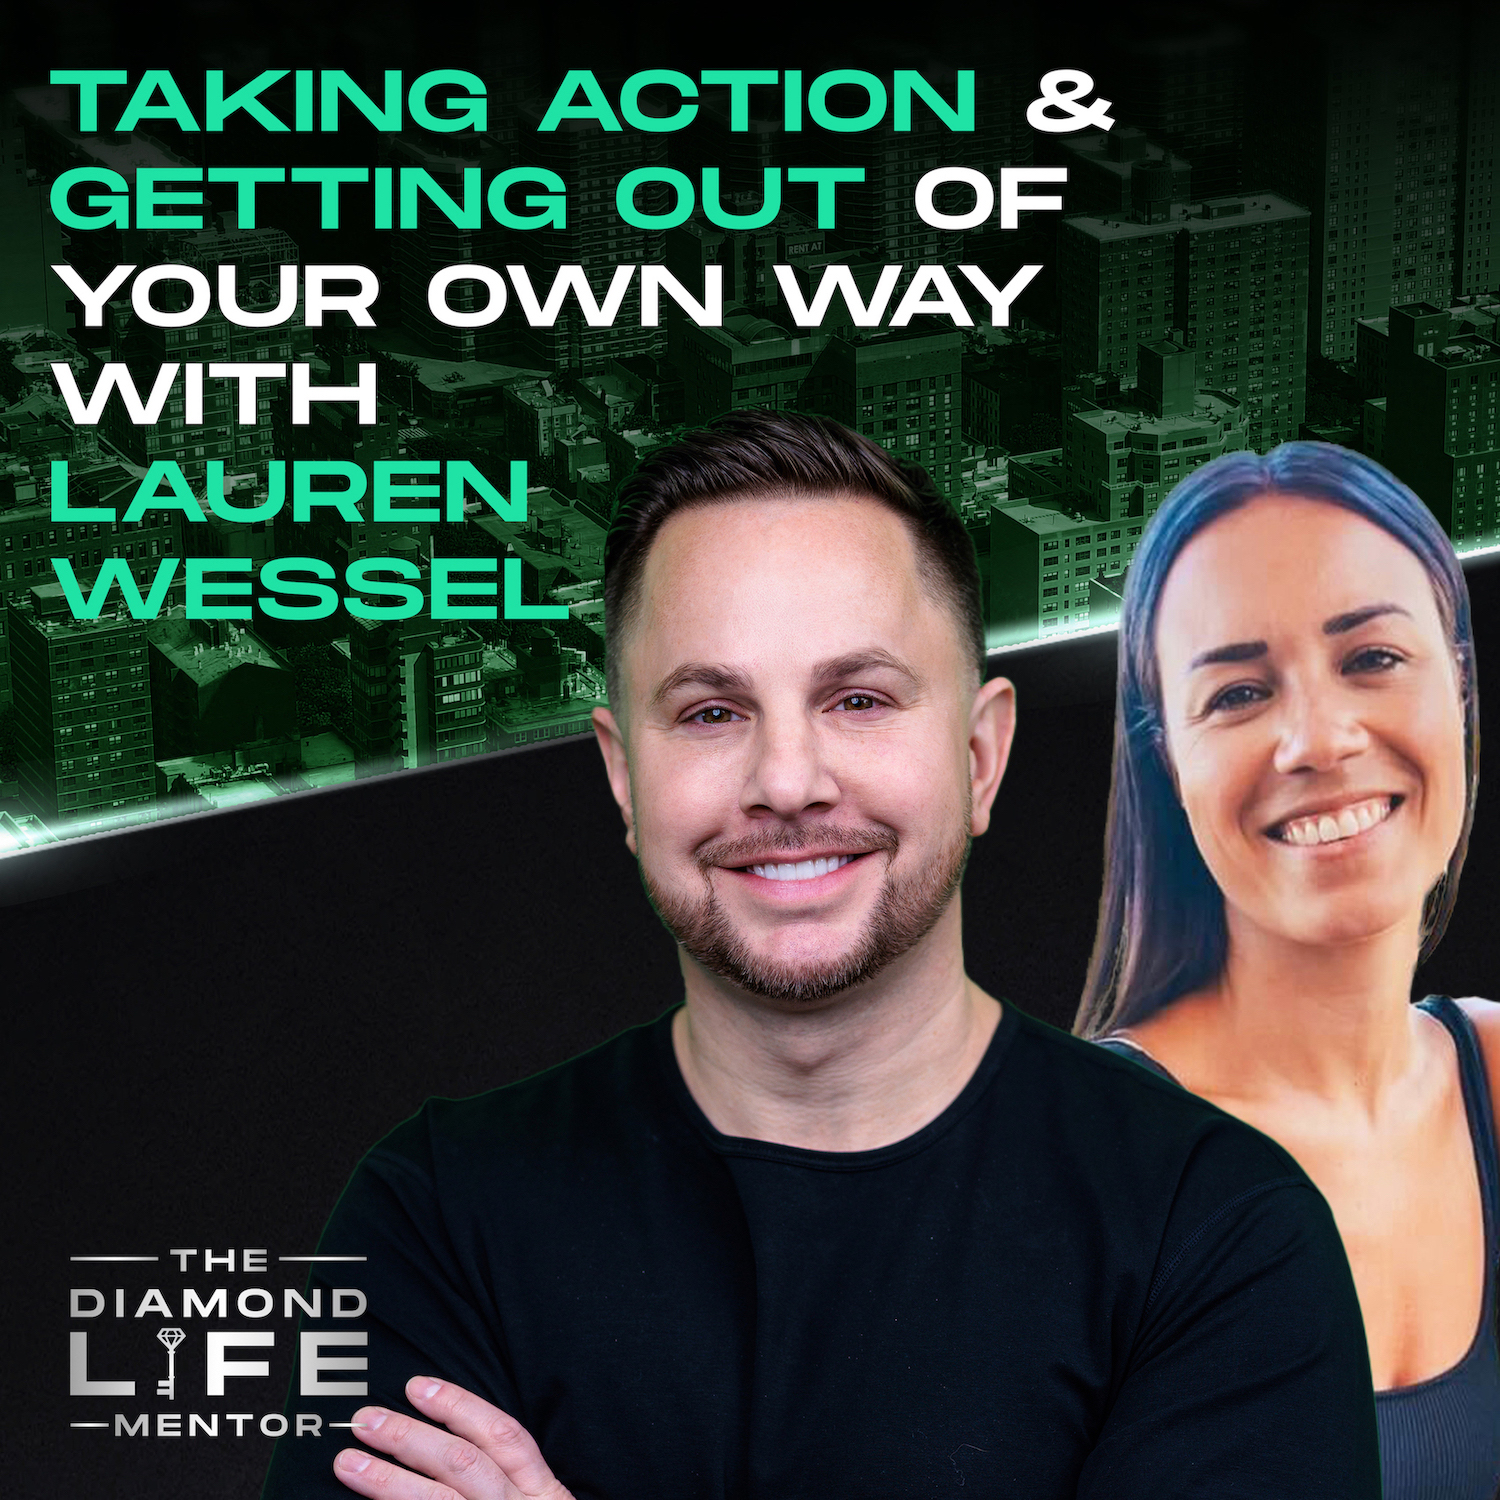 Taking Action & Getting Out of Your Own Way with Lauren Wessel